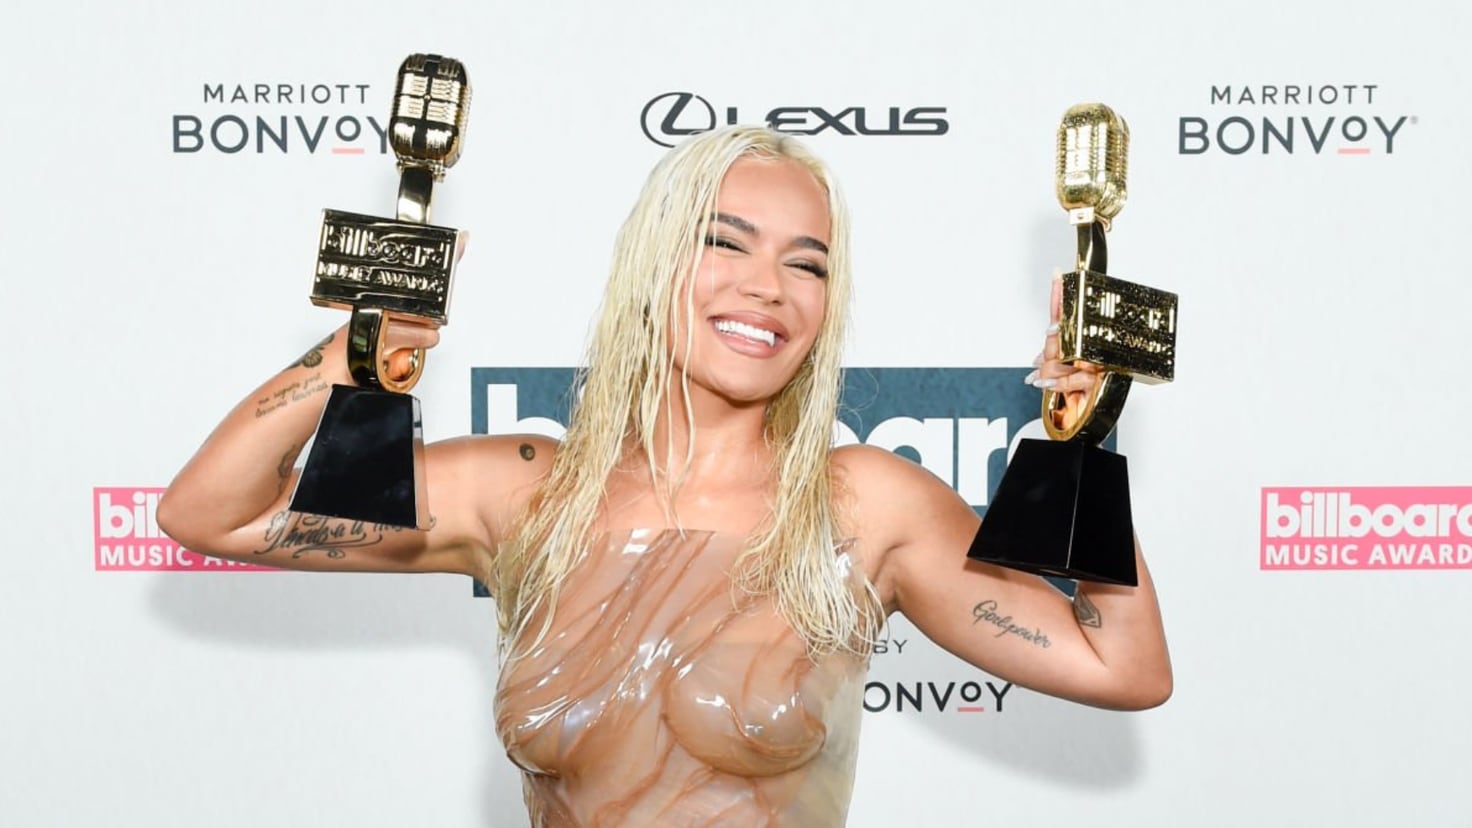 Billboard Music Awards 2023: Complete list of winners and awardees of the BBMAs
